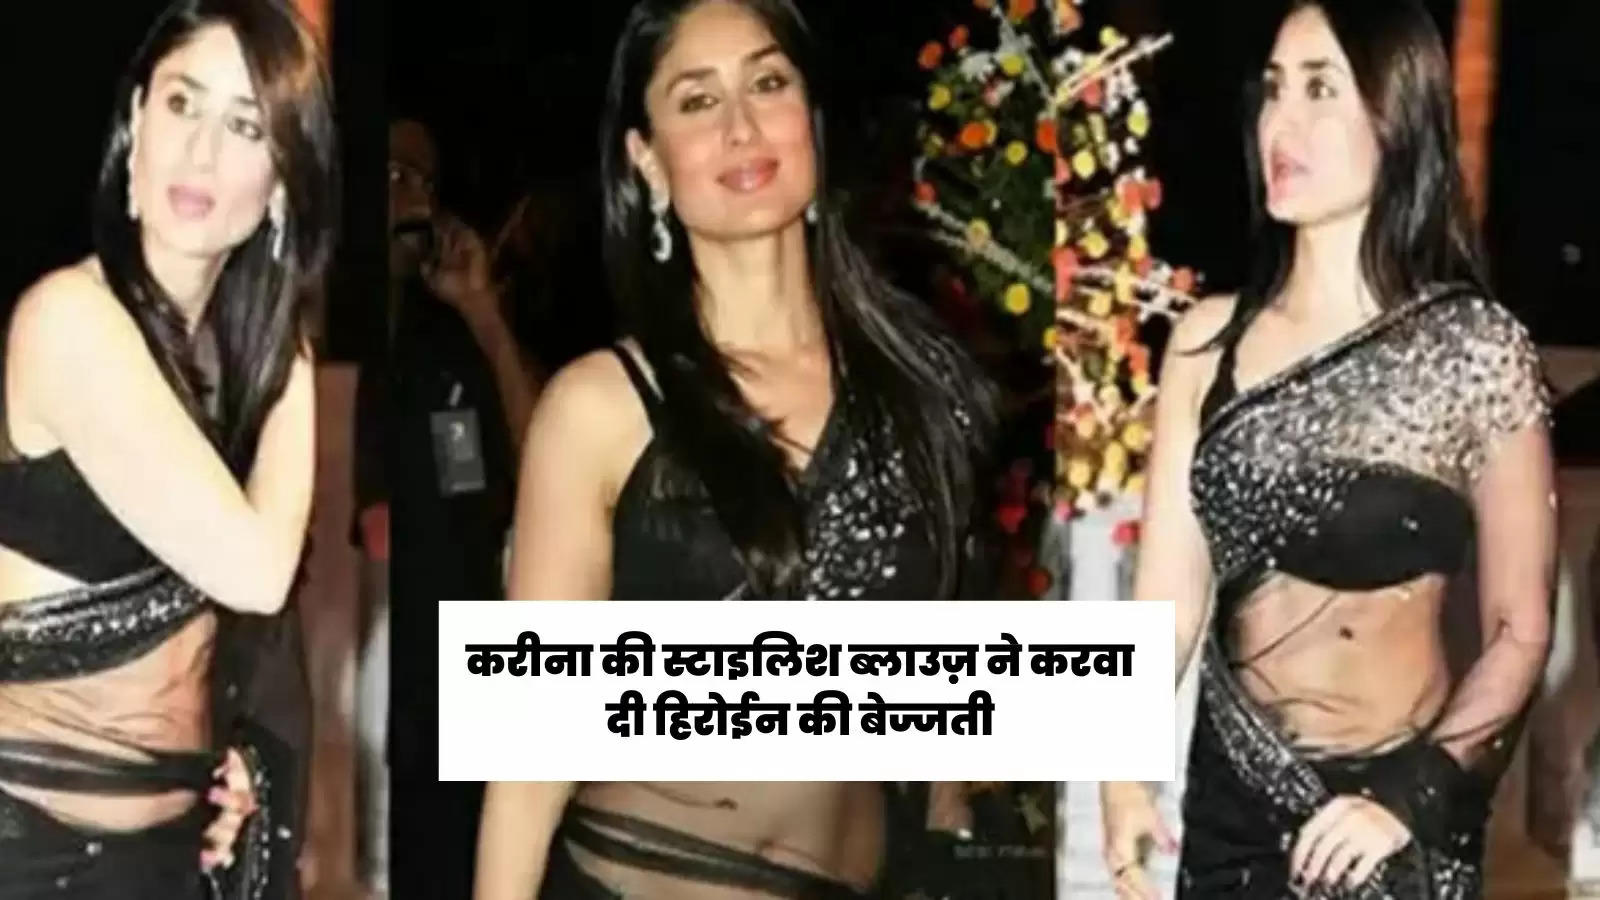 kareenas-blouse-betrayed-people-in-an-event-full-of-people